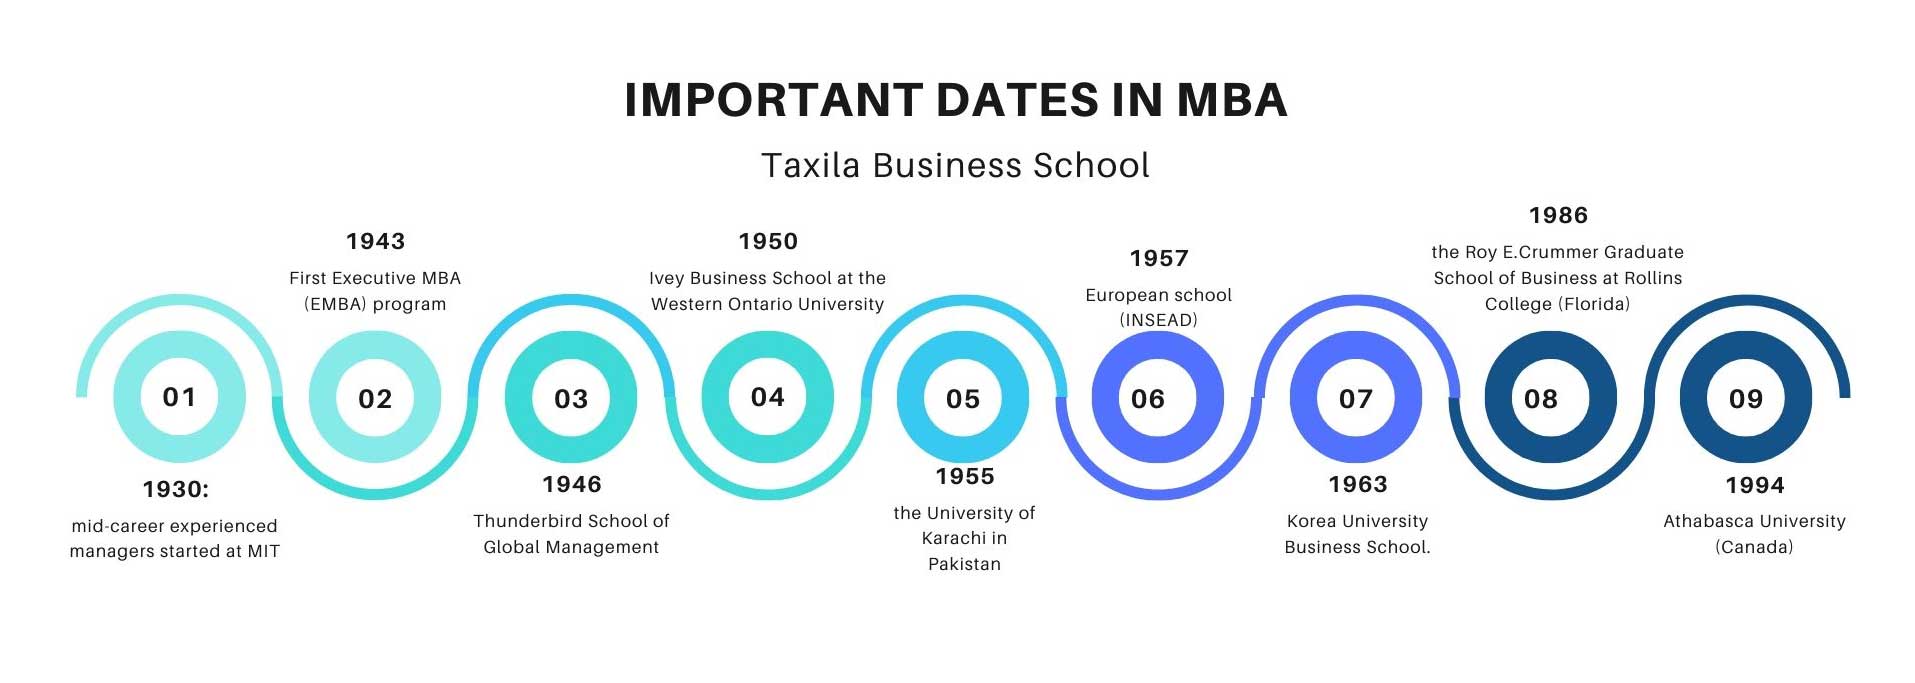 important dates in history of mba (masters in business administration)